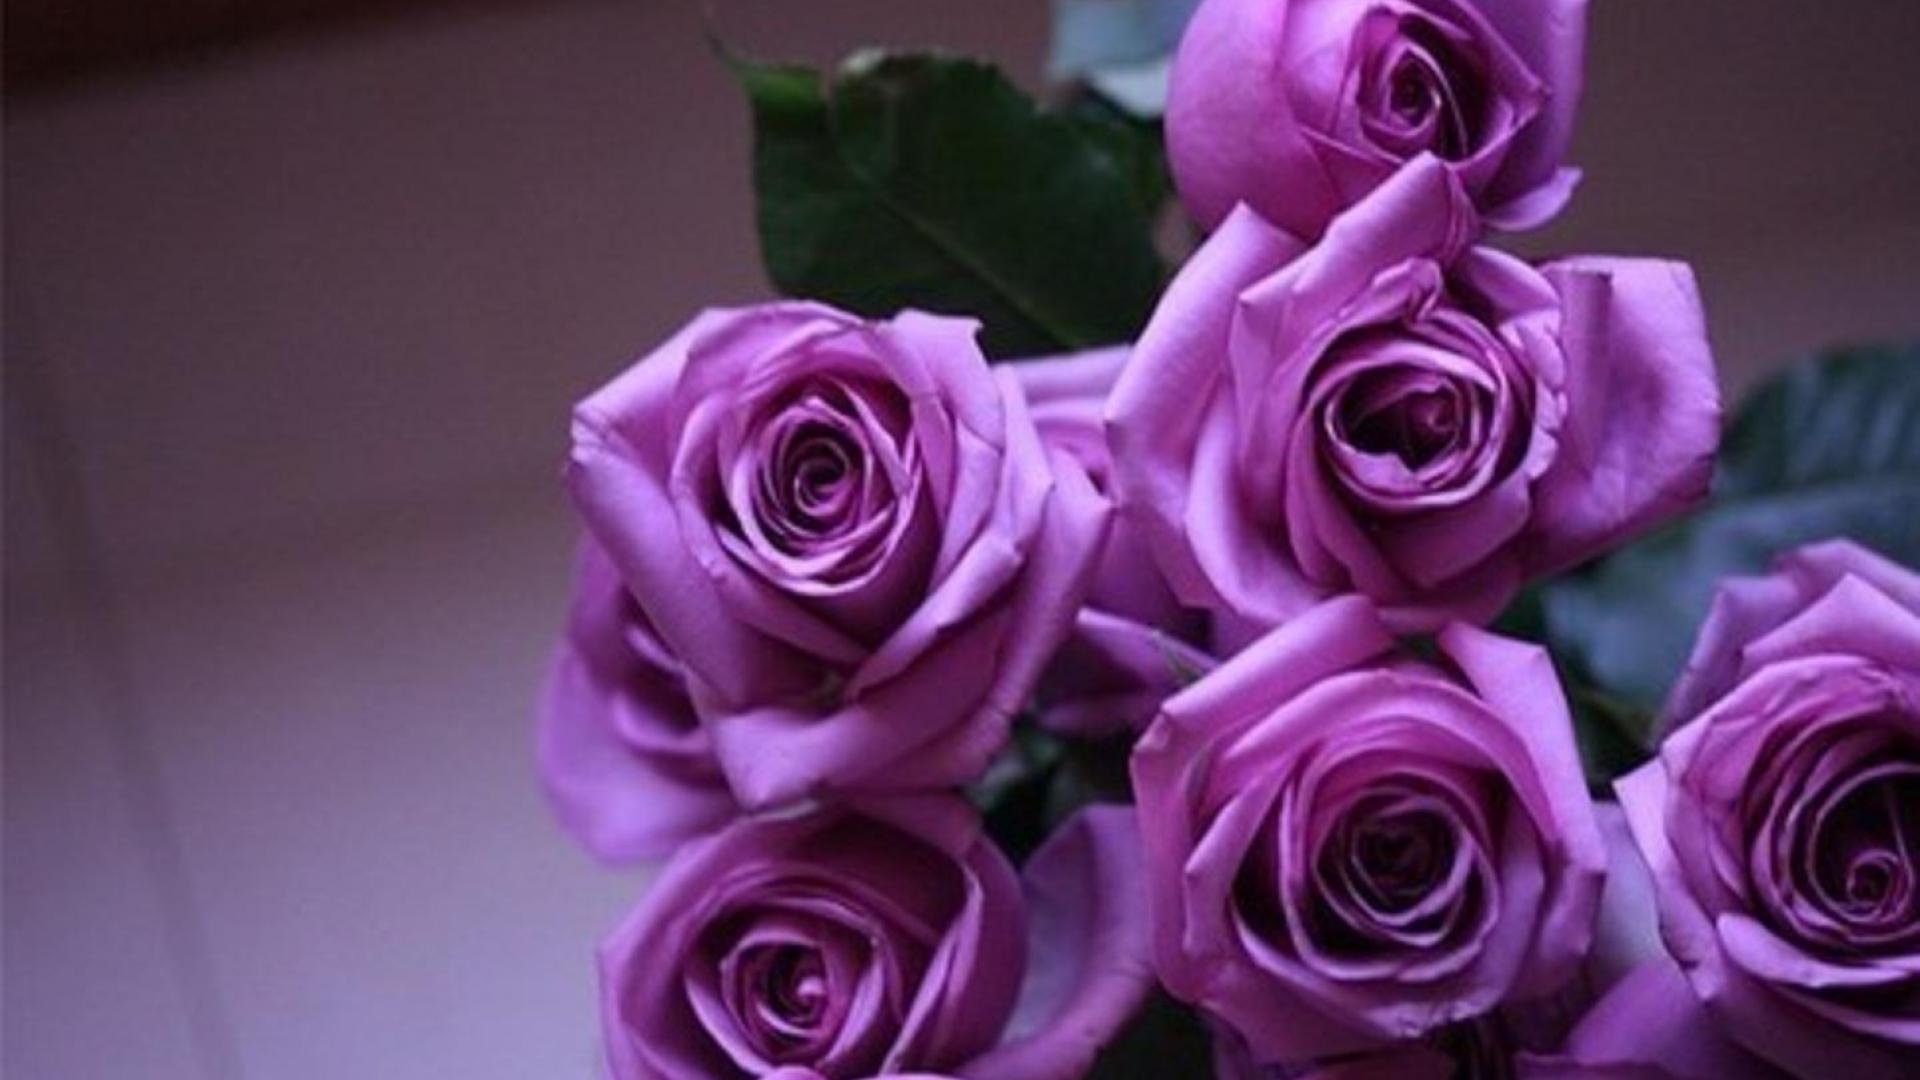 Purple Roses   Wallpaper High Definition High Quality Widescreen